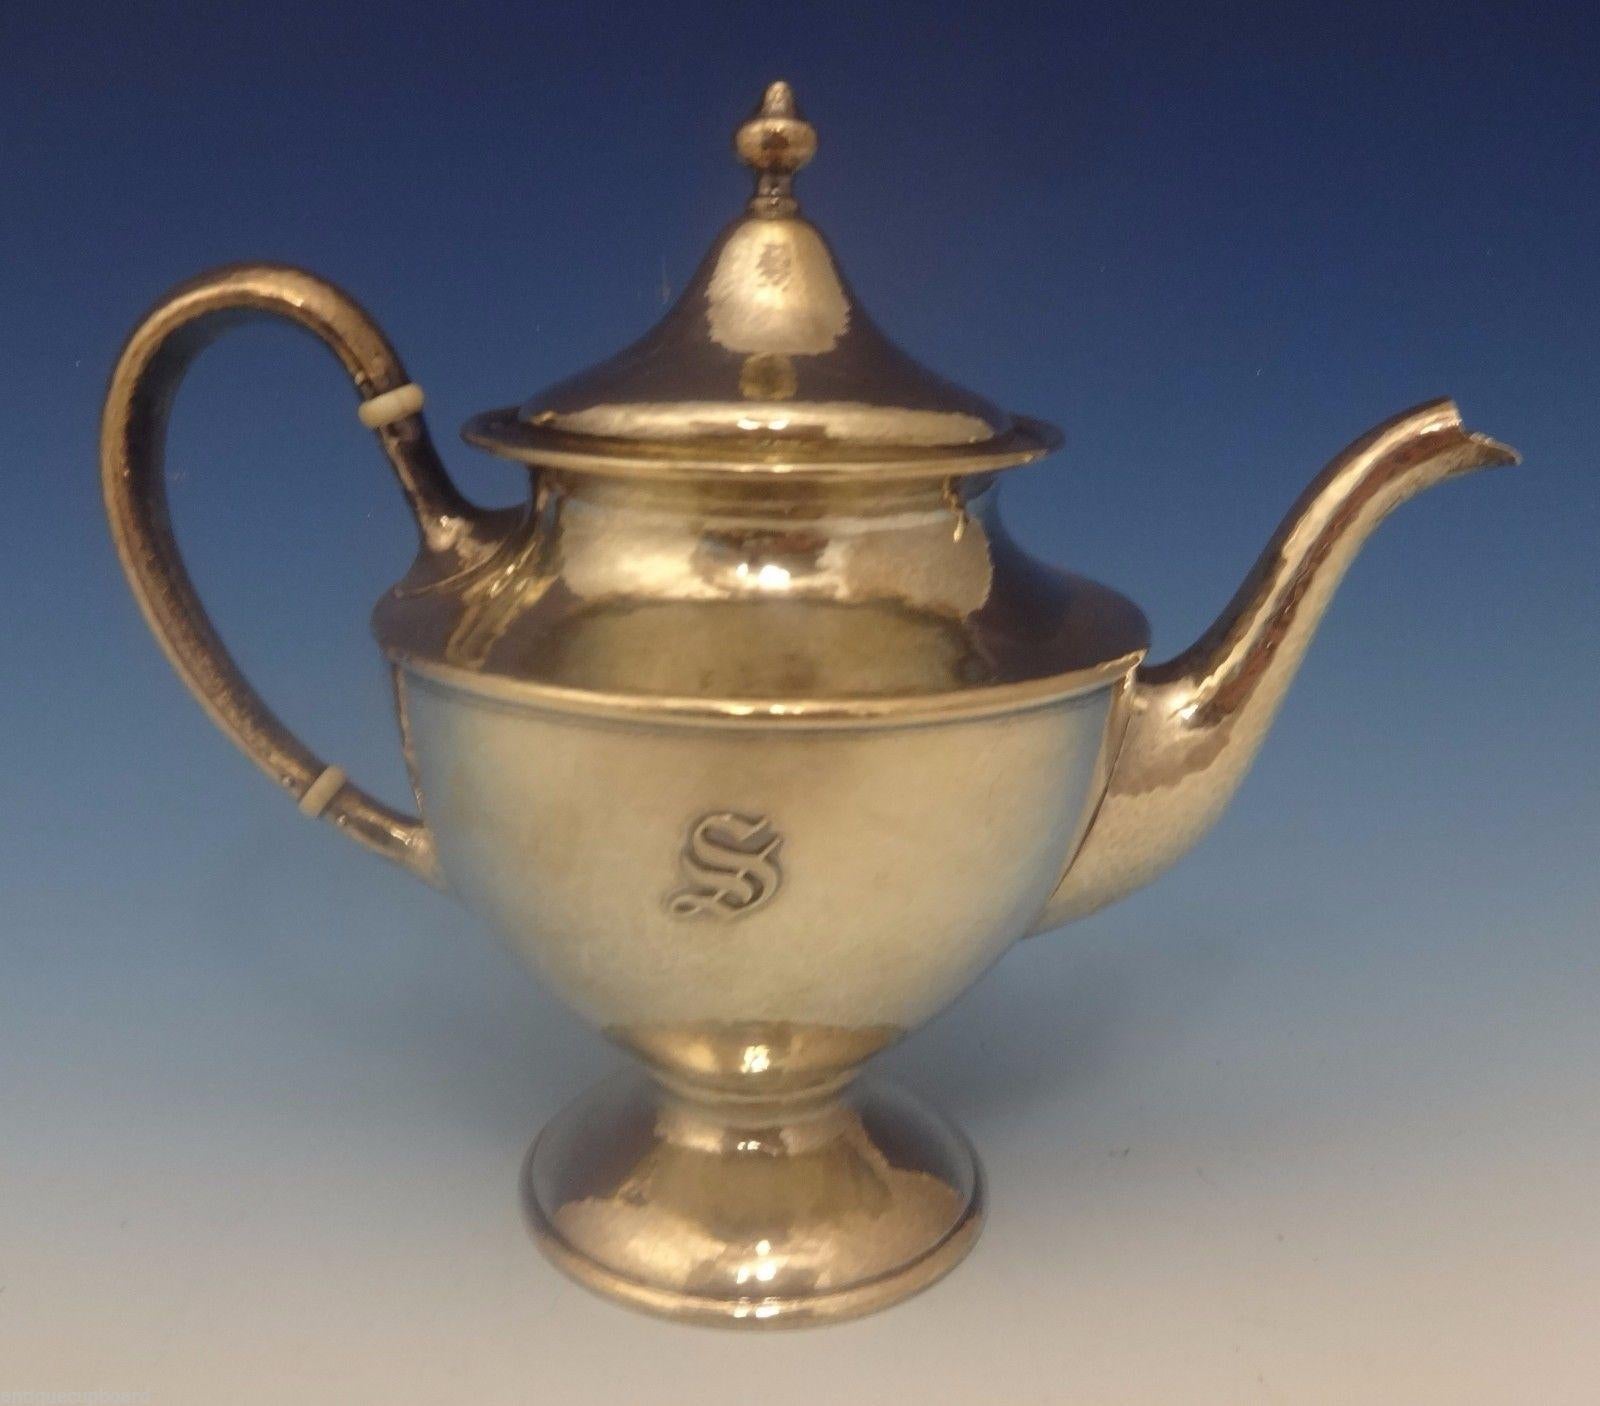 American Antique Hammered by Shreve Sterling Silver Tea Set of 5 Pieces